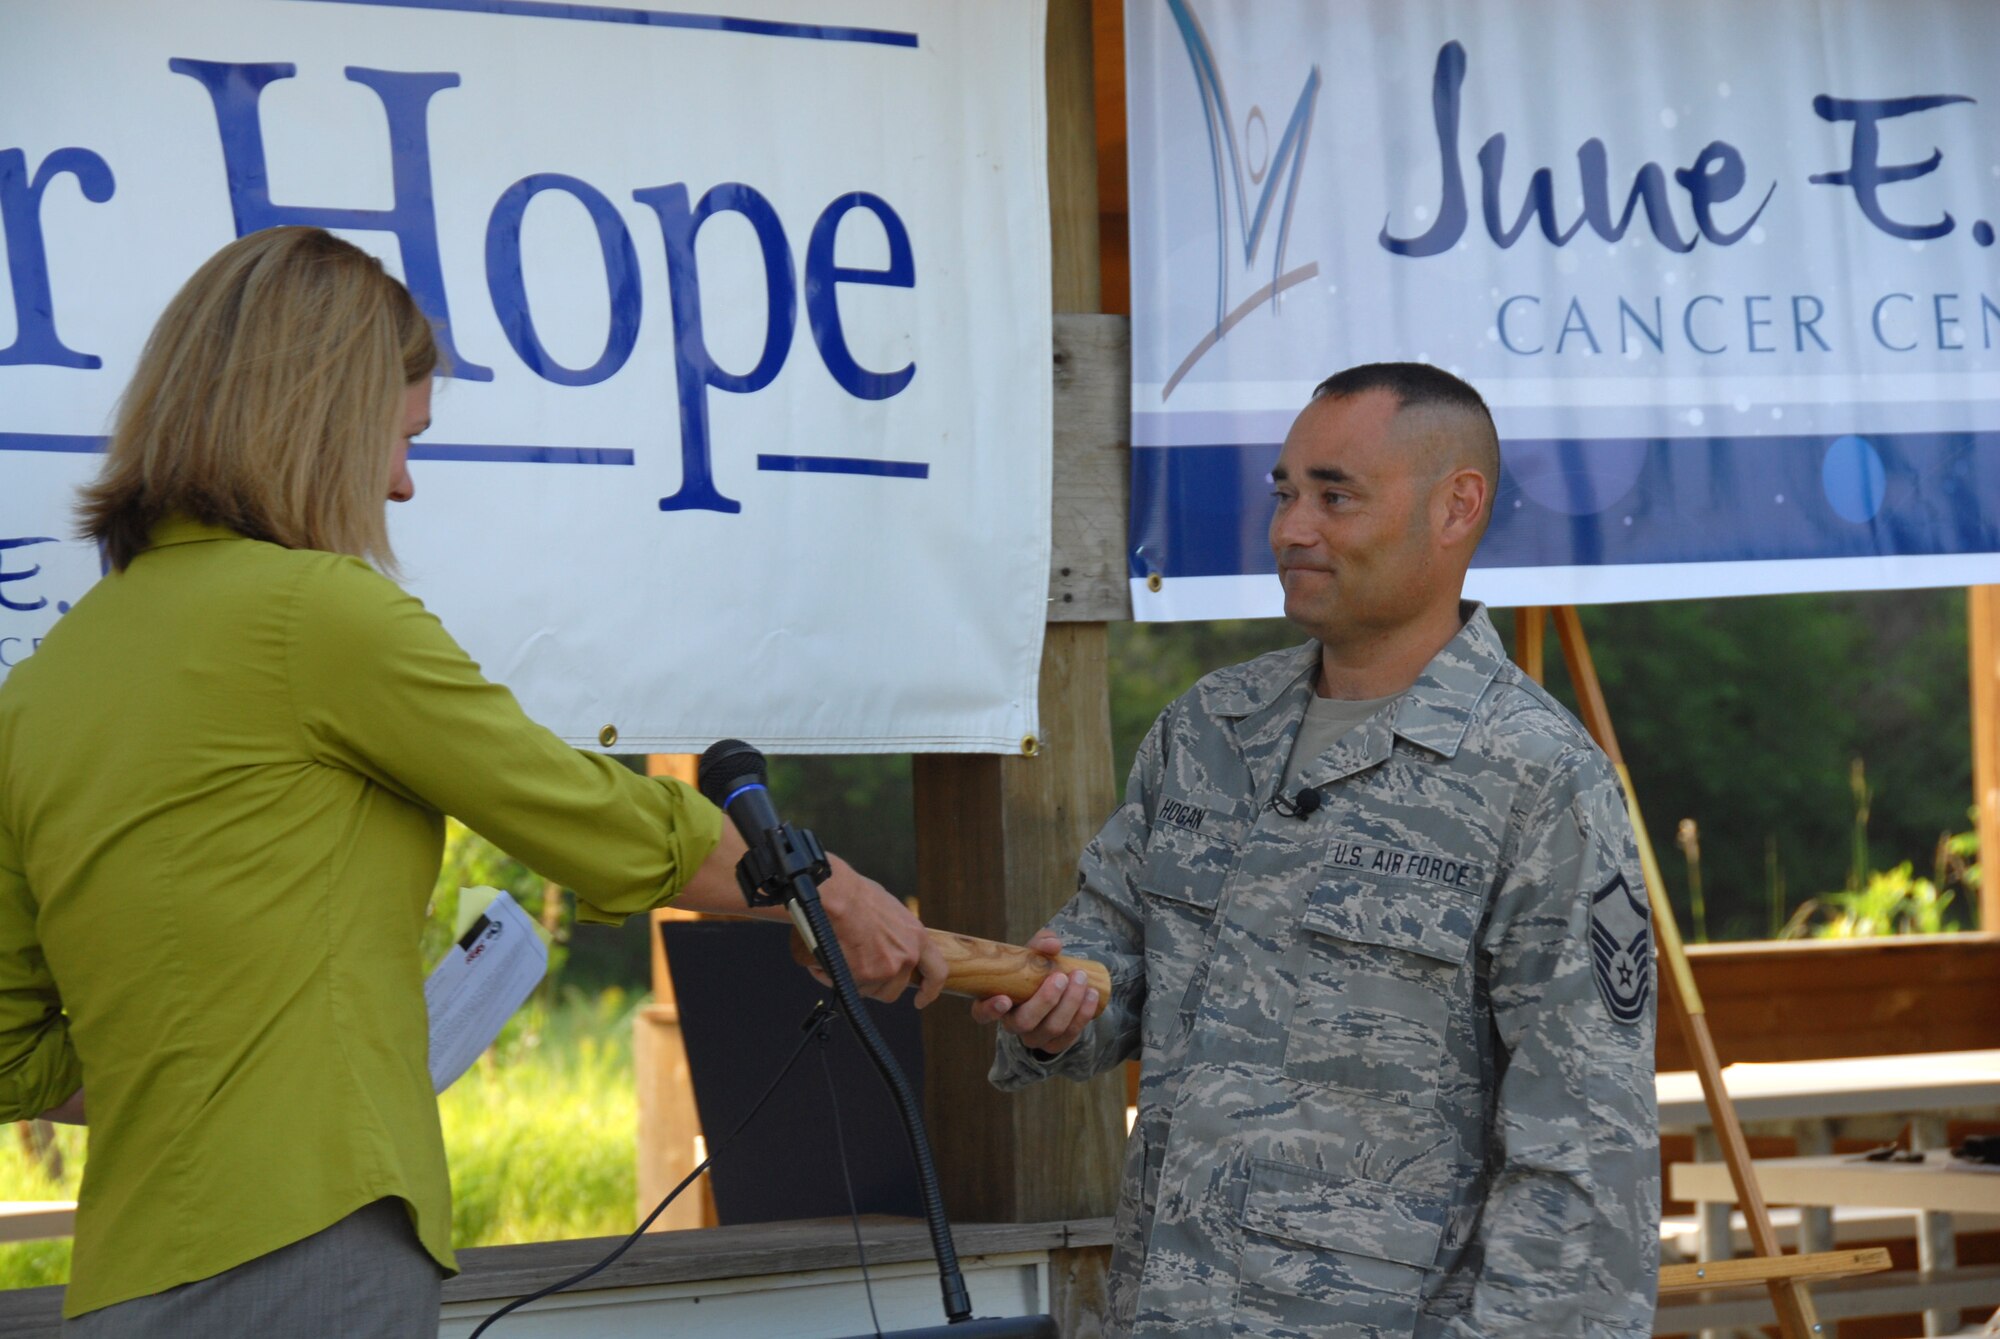 Master Sgt. Marty Hogan of the Air National Guard's 185th Air Refueling Wing accepts the baton as spokesperson for the 185th while at the Adams Homestead and Nature Preserve, McCook Lake, South Dakota on July 13, 2010. The 185th ARW was selected as the Honorary Race Ambassador Group for the June E. Nylen Cancer Center Race for Hope. 
(Photo by Air Force Photographer TSgt Brian Cox) (Released)